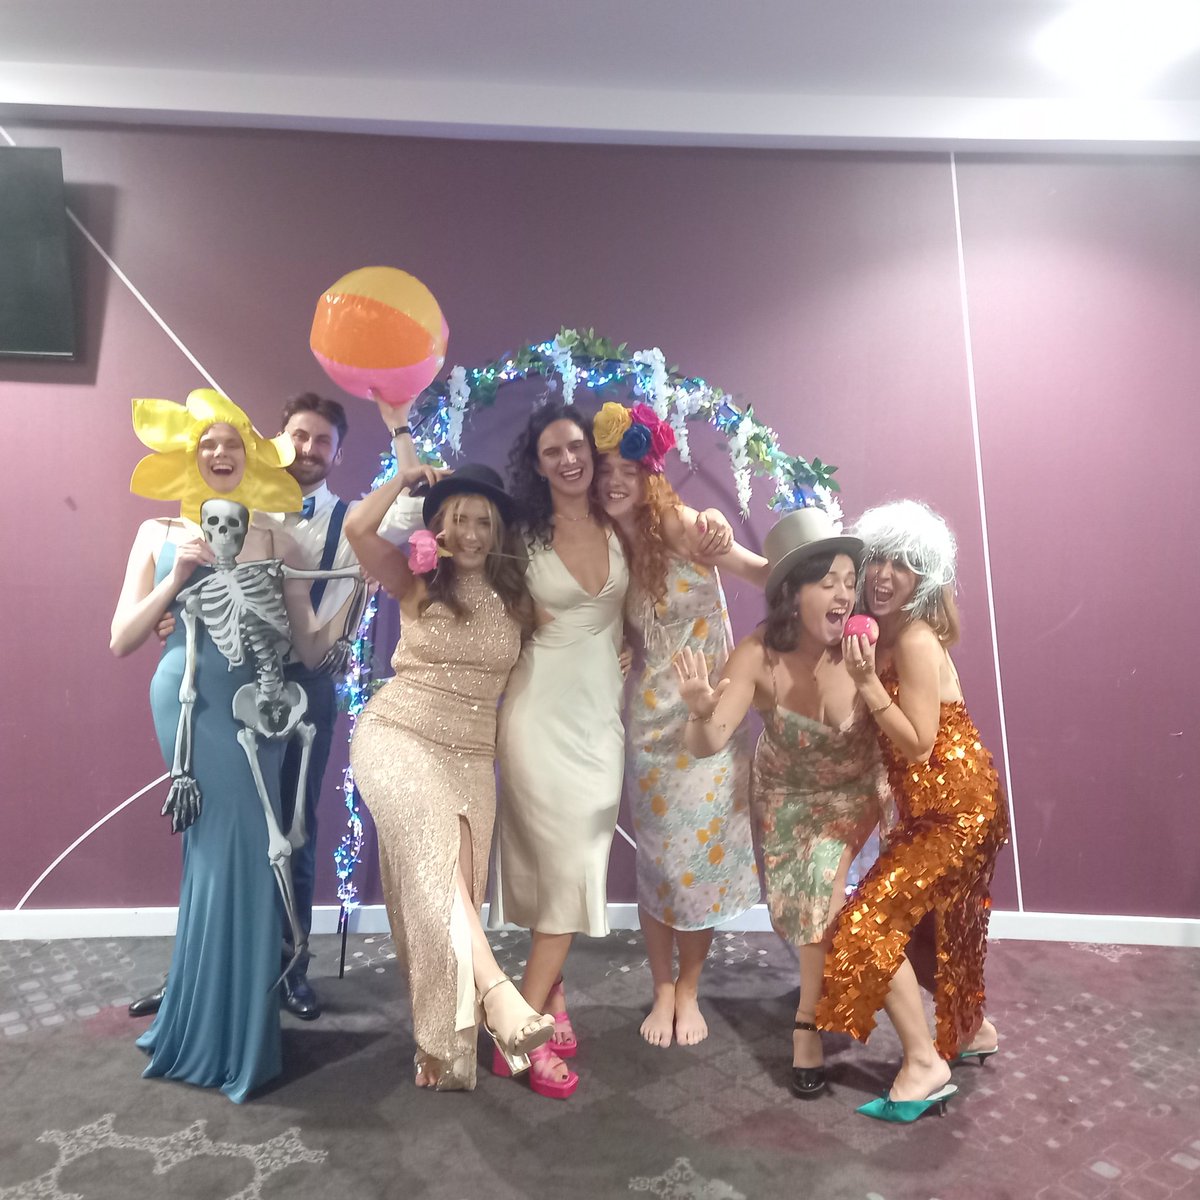 We had a ball, quite literally! The #Occupation of #Play was evident! Thank you @closomatuk and @ukotac for your generous sponsorship, we appreciate it so much! #OccupationalTherapy @UWEBristol @UWE_AHP @LaughingOT